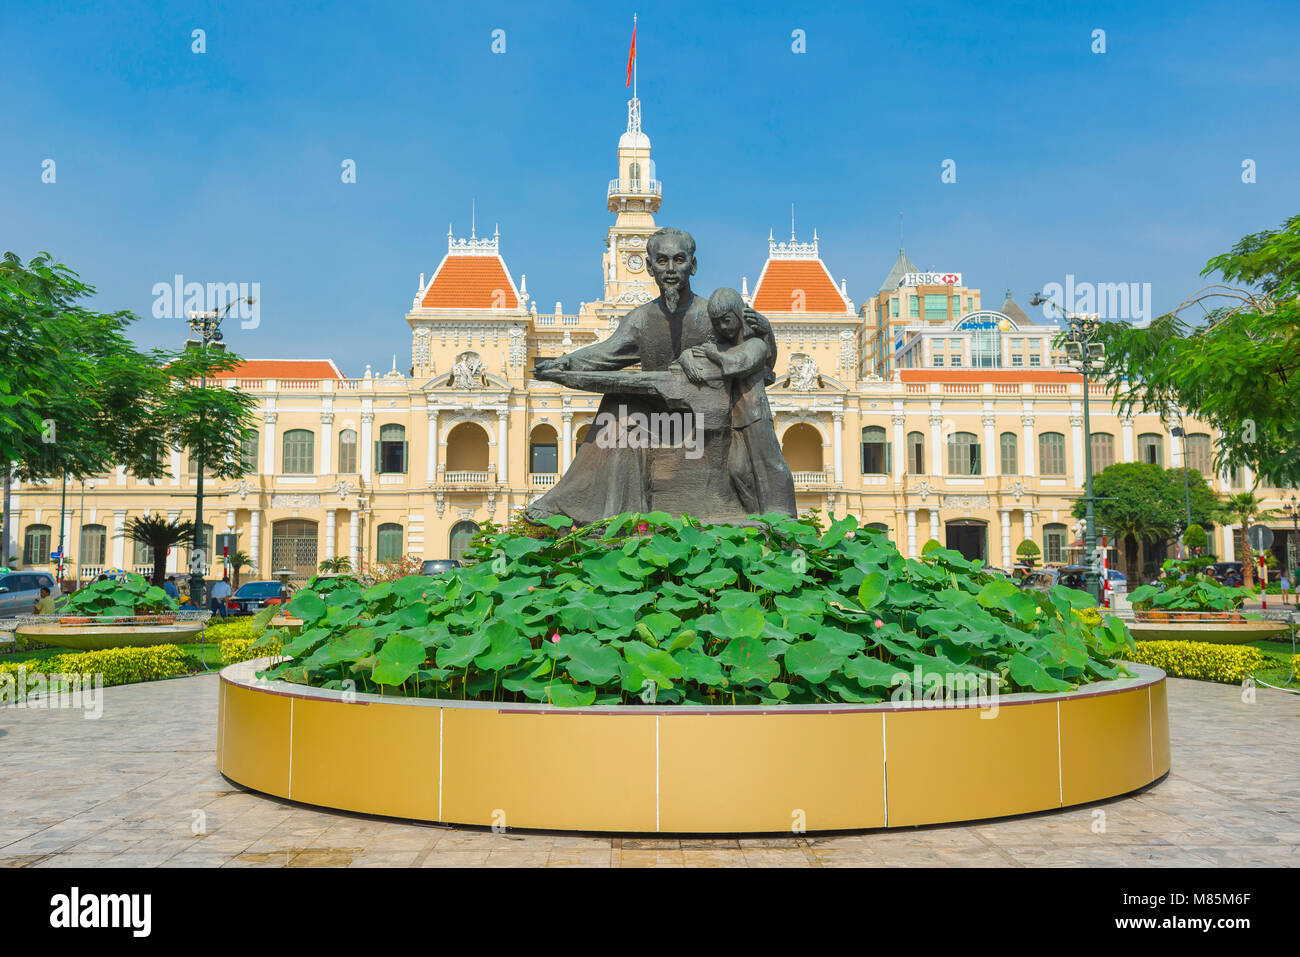 Ho Chi Minh City, statue of Ho Chi Minh sited in front of the colonial-era landmark Hotel de Ville in the centre of HCMC, Saigon, Vietnam. Stock Photo